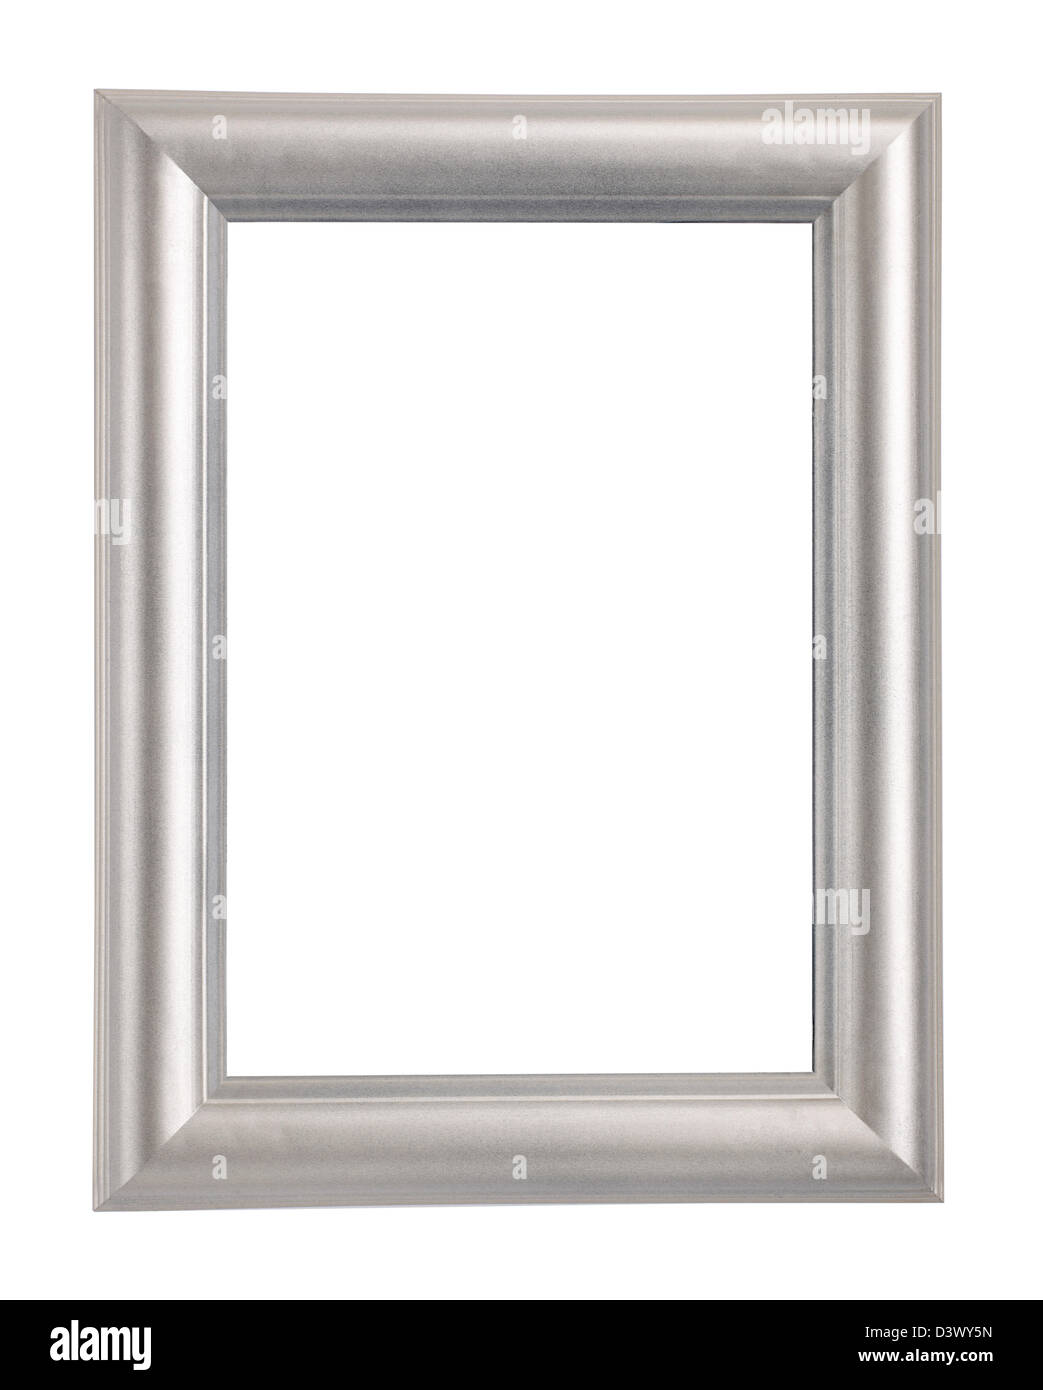 silver metal Picture frame Stock Photo